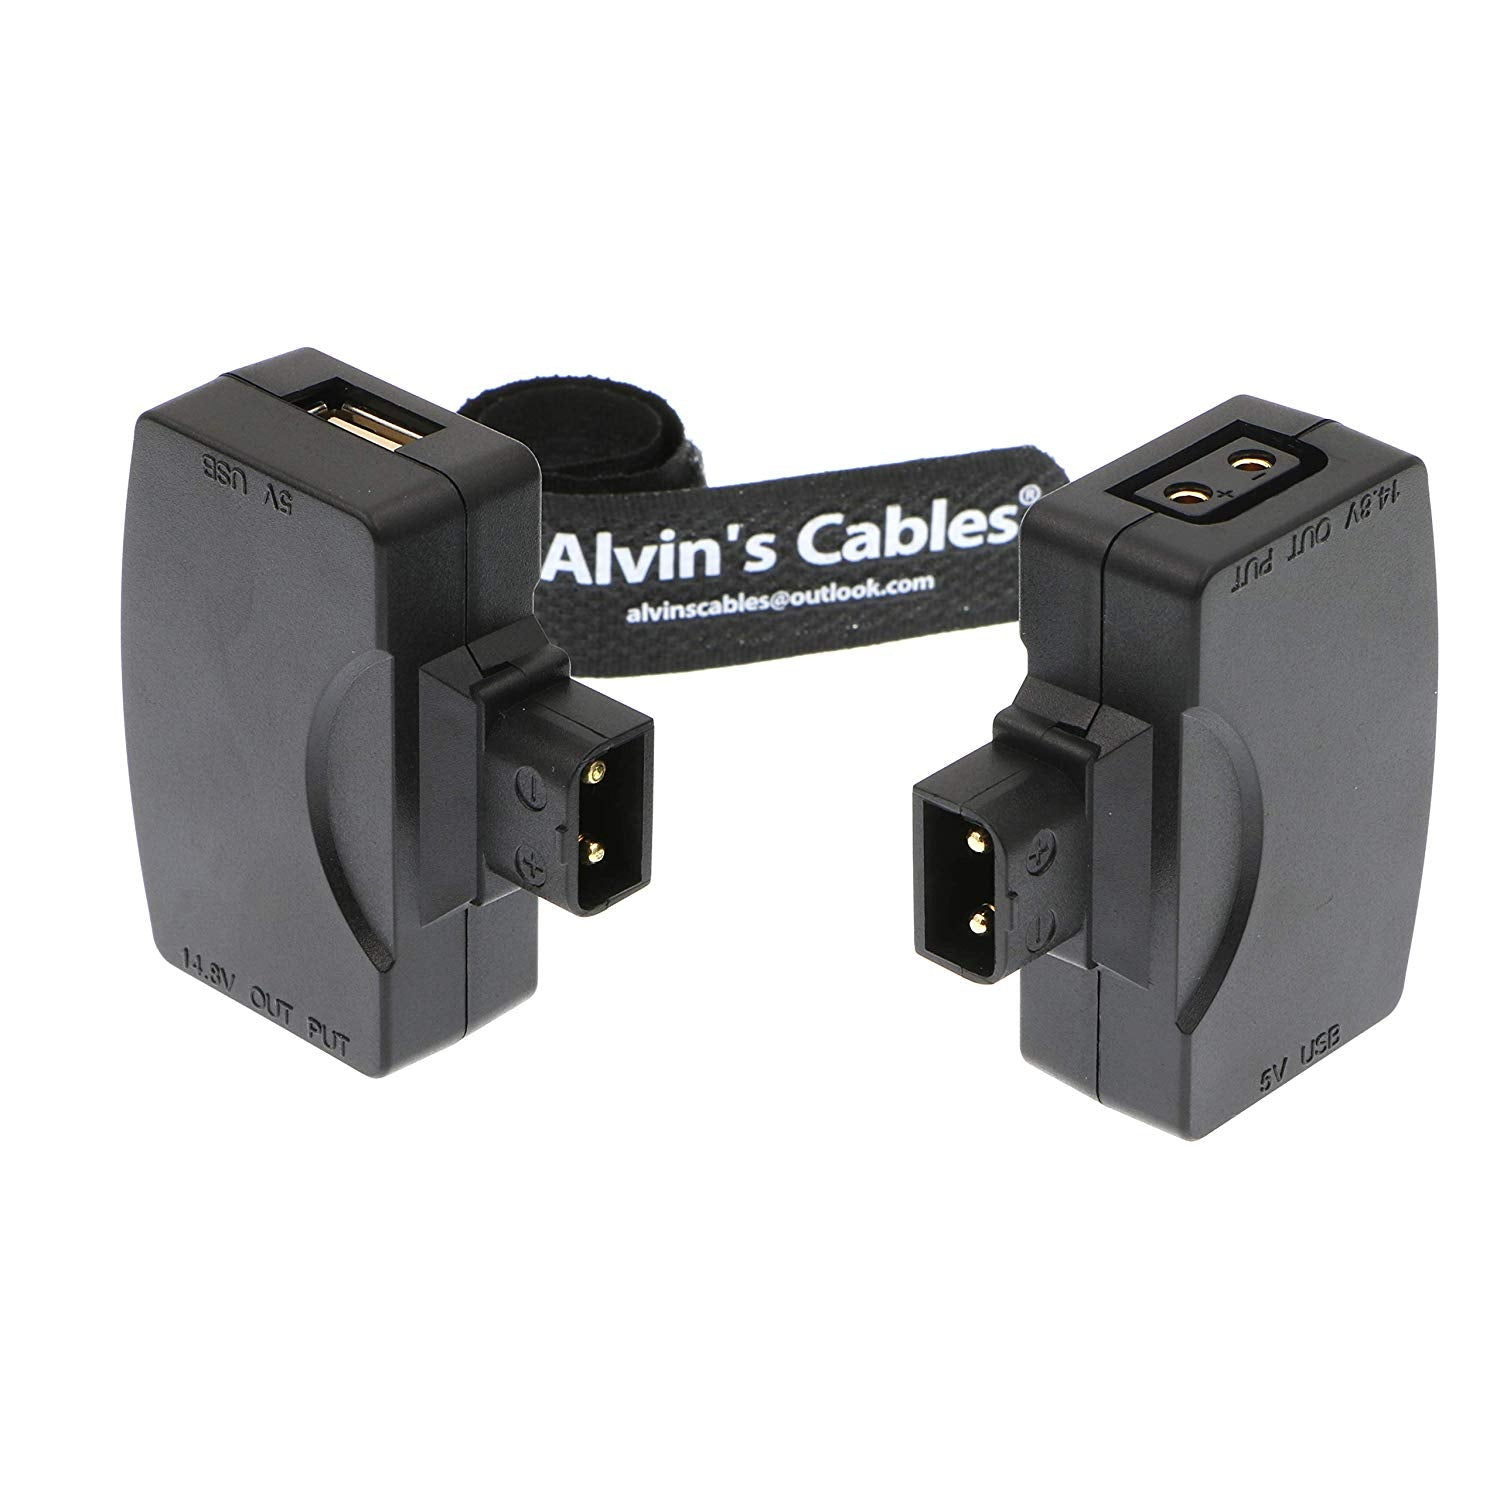 Alvin's Cables D Tap P Tap to USB 5V Adapter Converter Dtap Male to Female 5V USB Female Connector for Phone Camera Monitor 2 Pcs